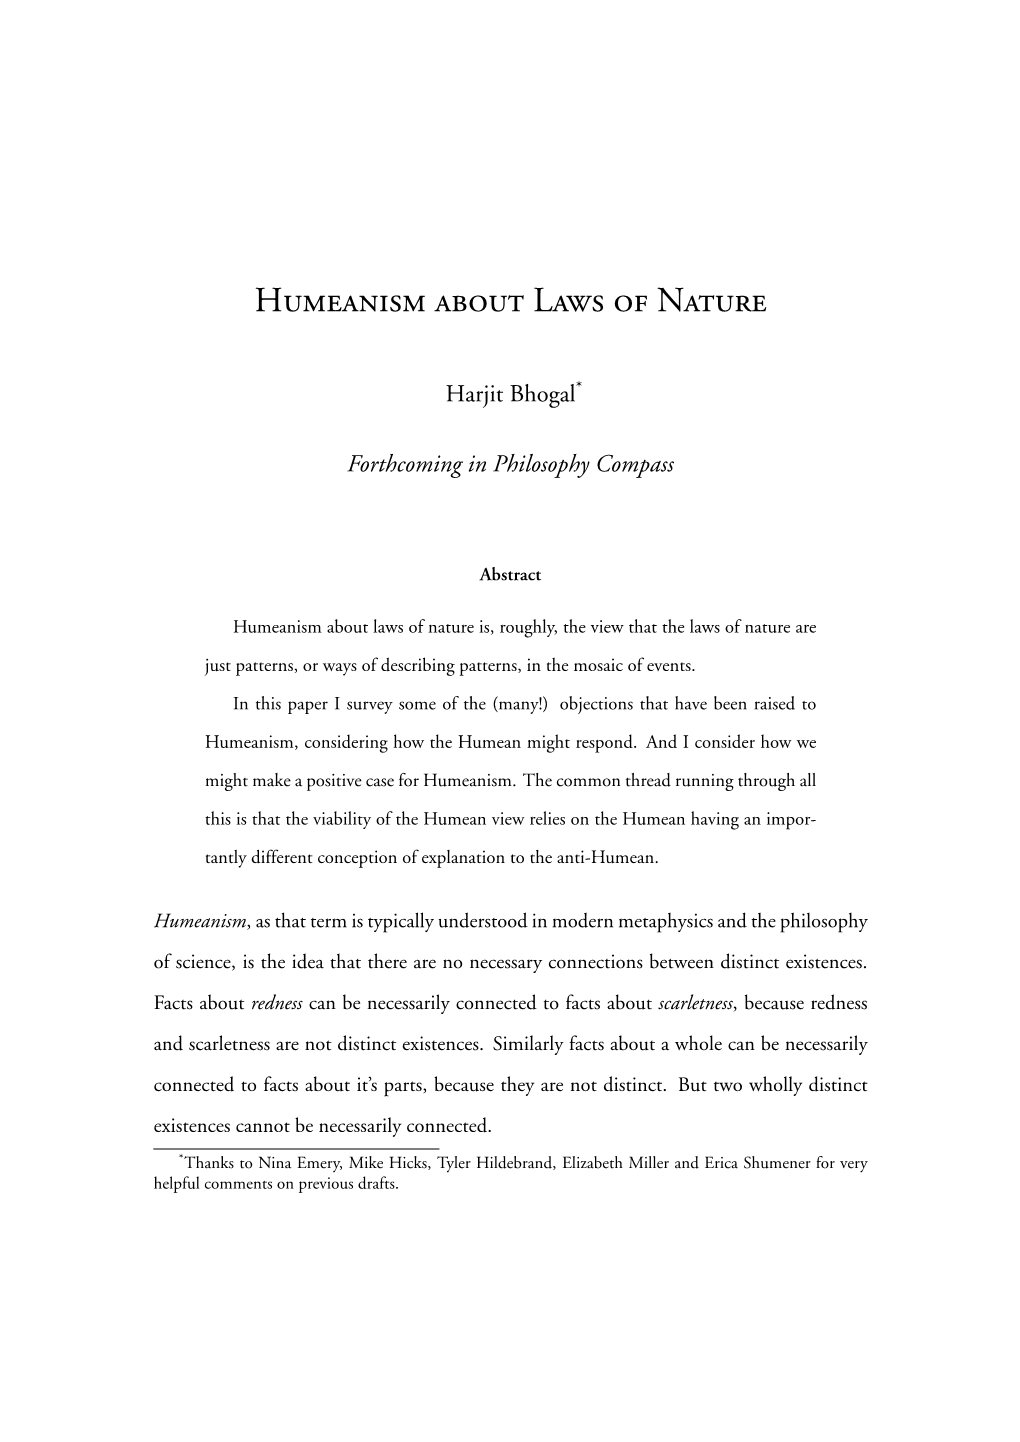 Humeanism About Laws of Nature